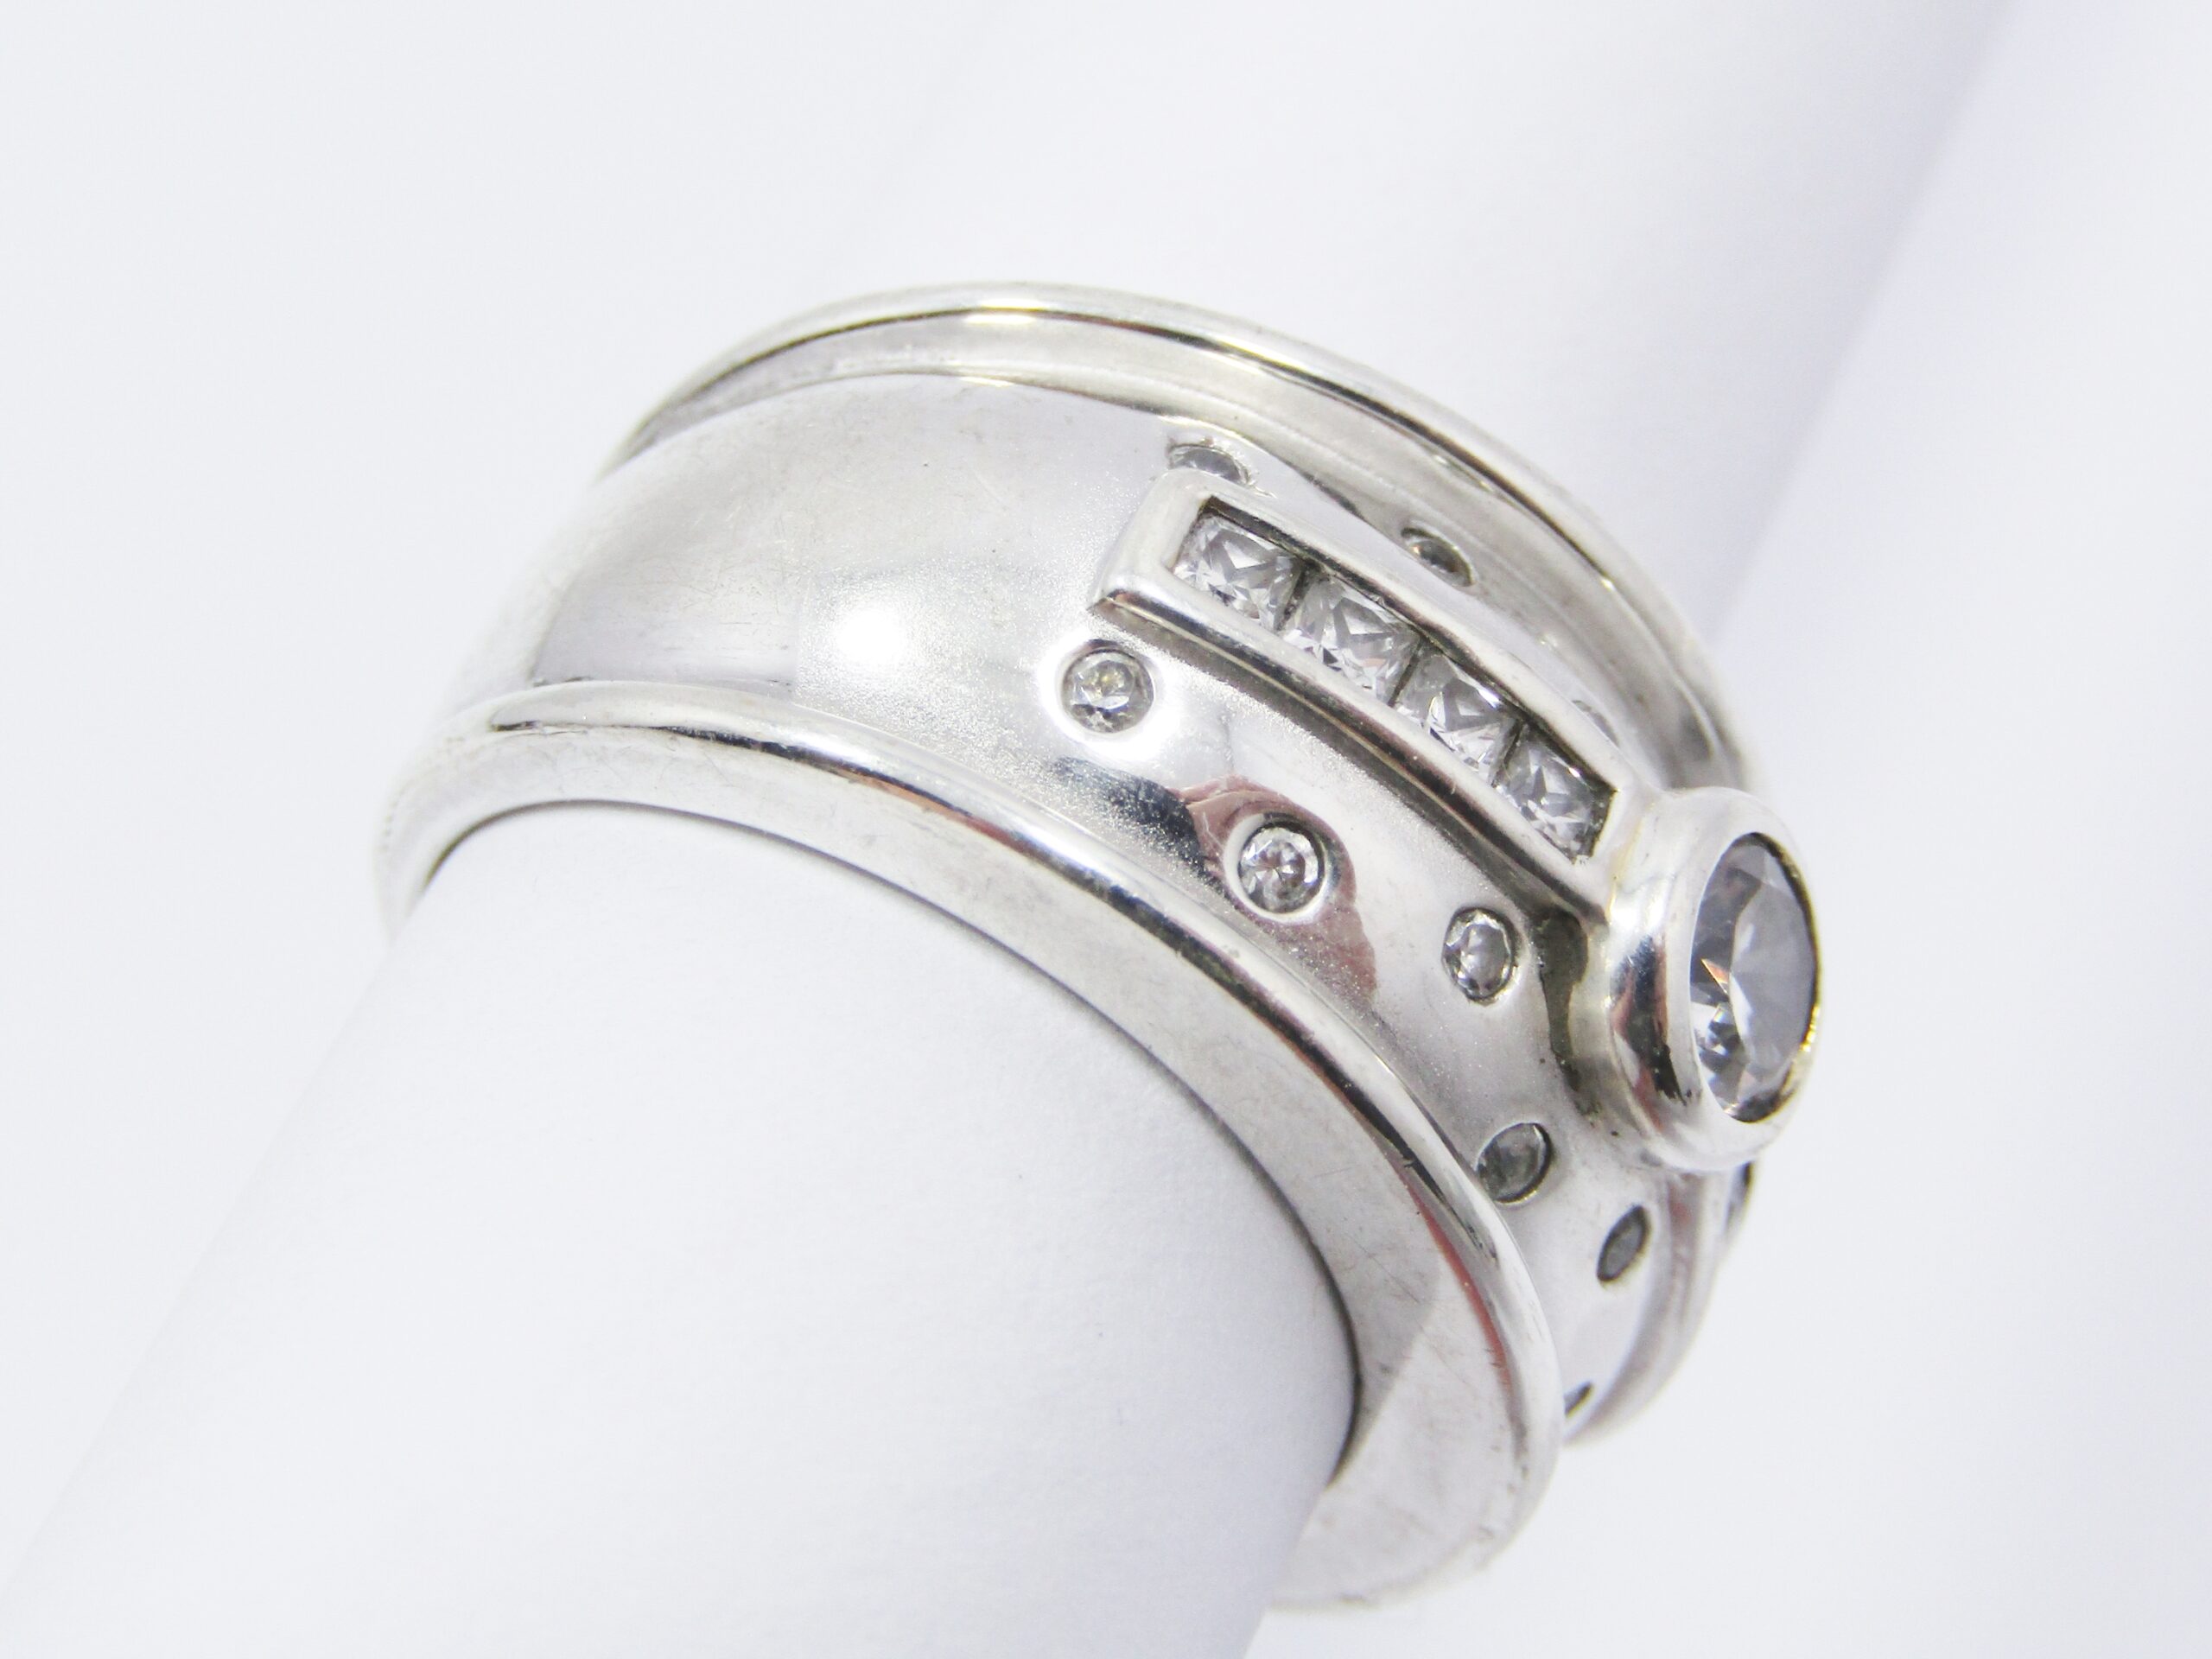 A Lovely Solid Bespoke Ring With Zirconia’s in Sterling Silver